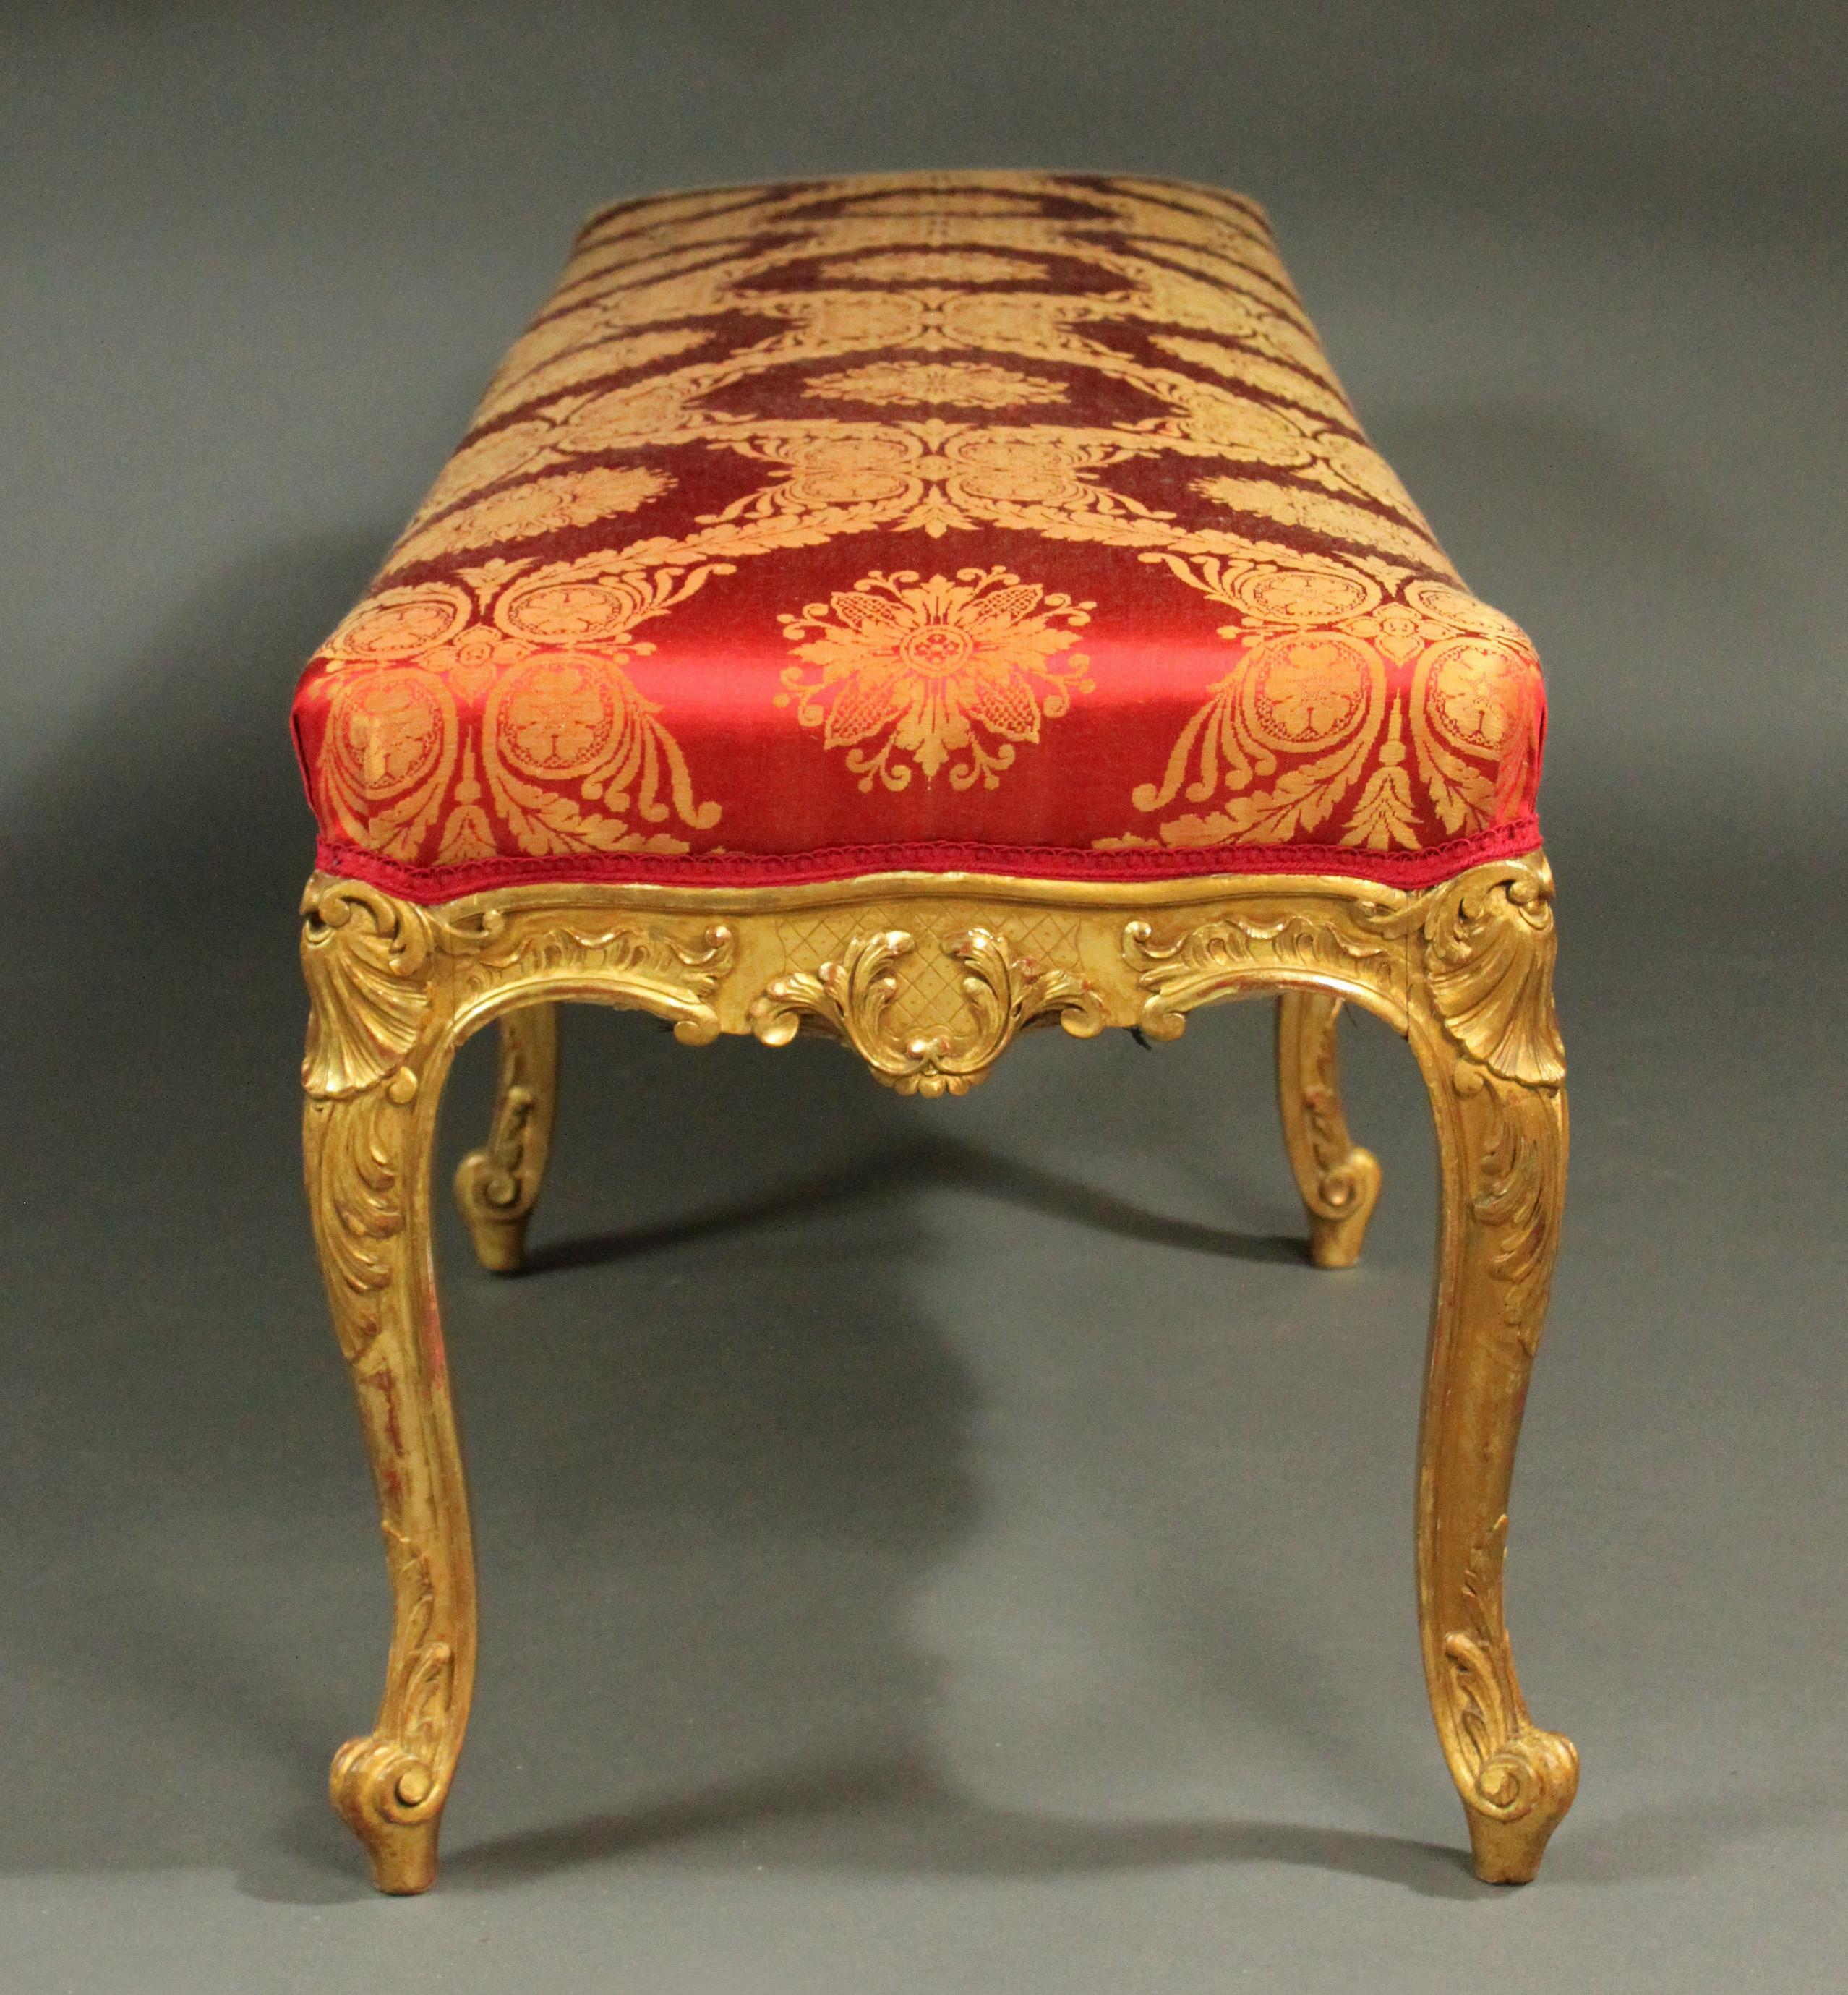 Louis XVI Style Giltwood Stool In Good Condition For Sale In Bradford-on-Avon, Wiltshire